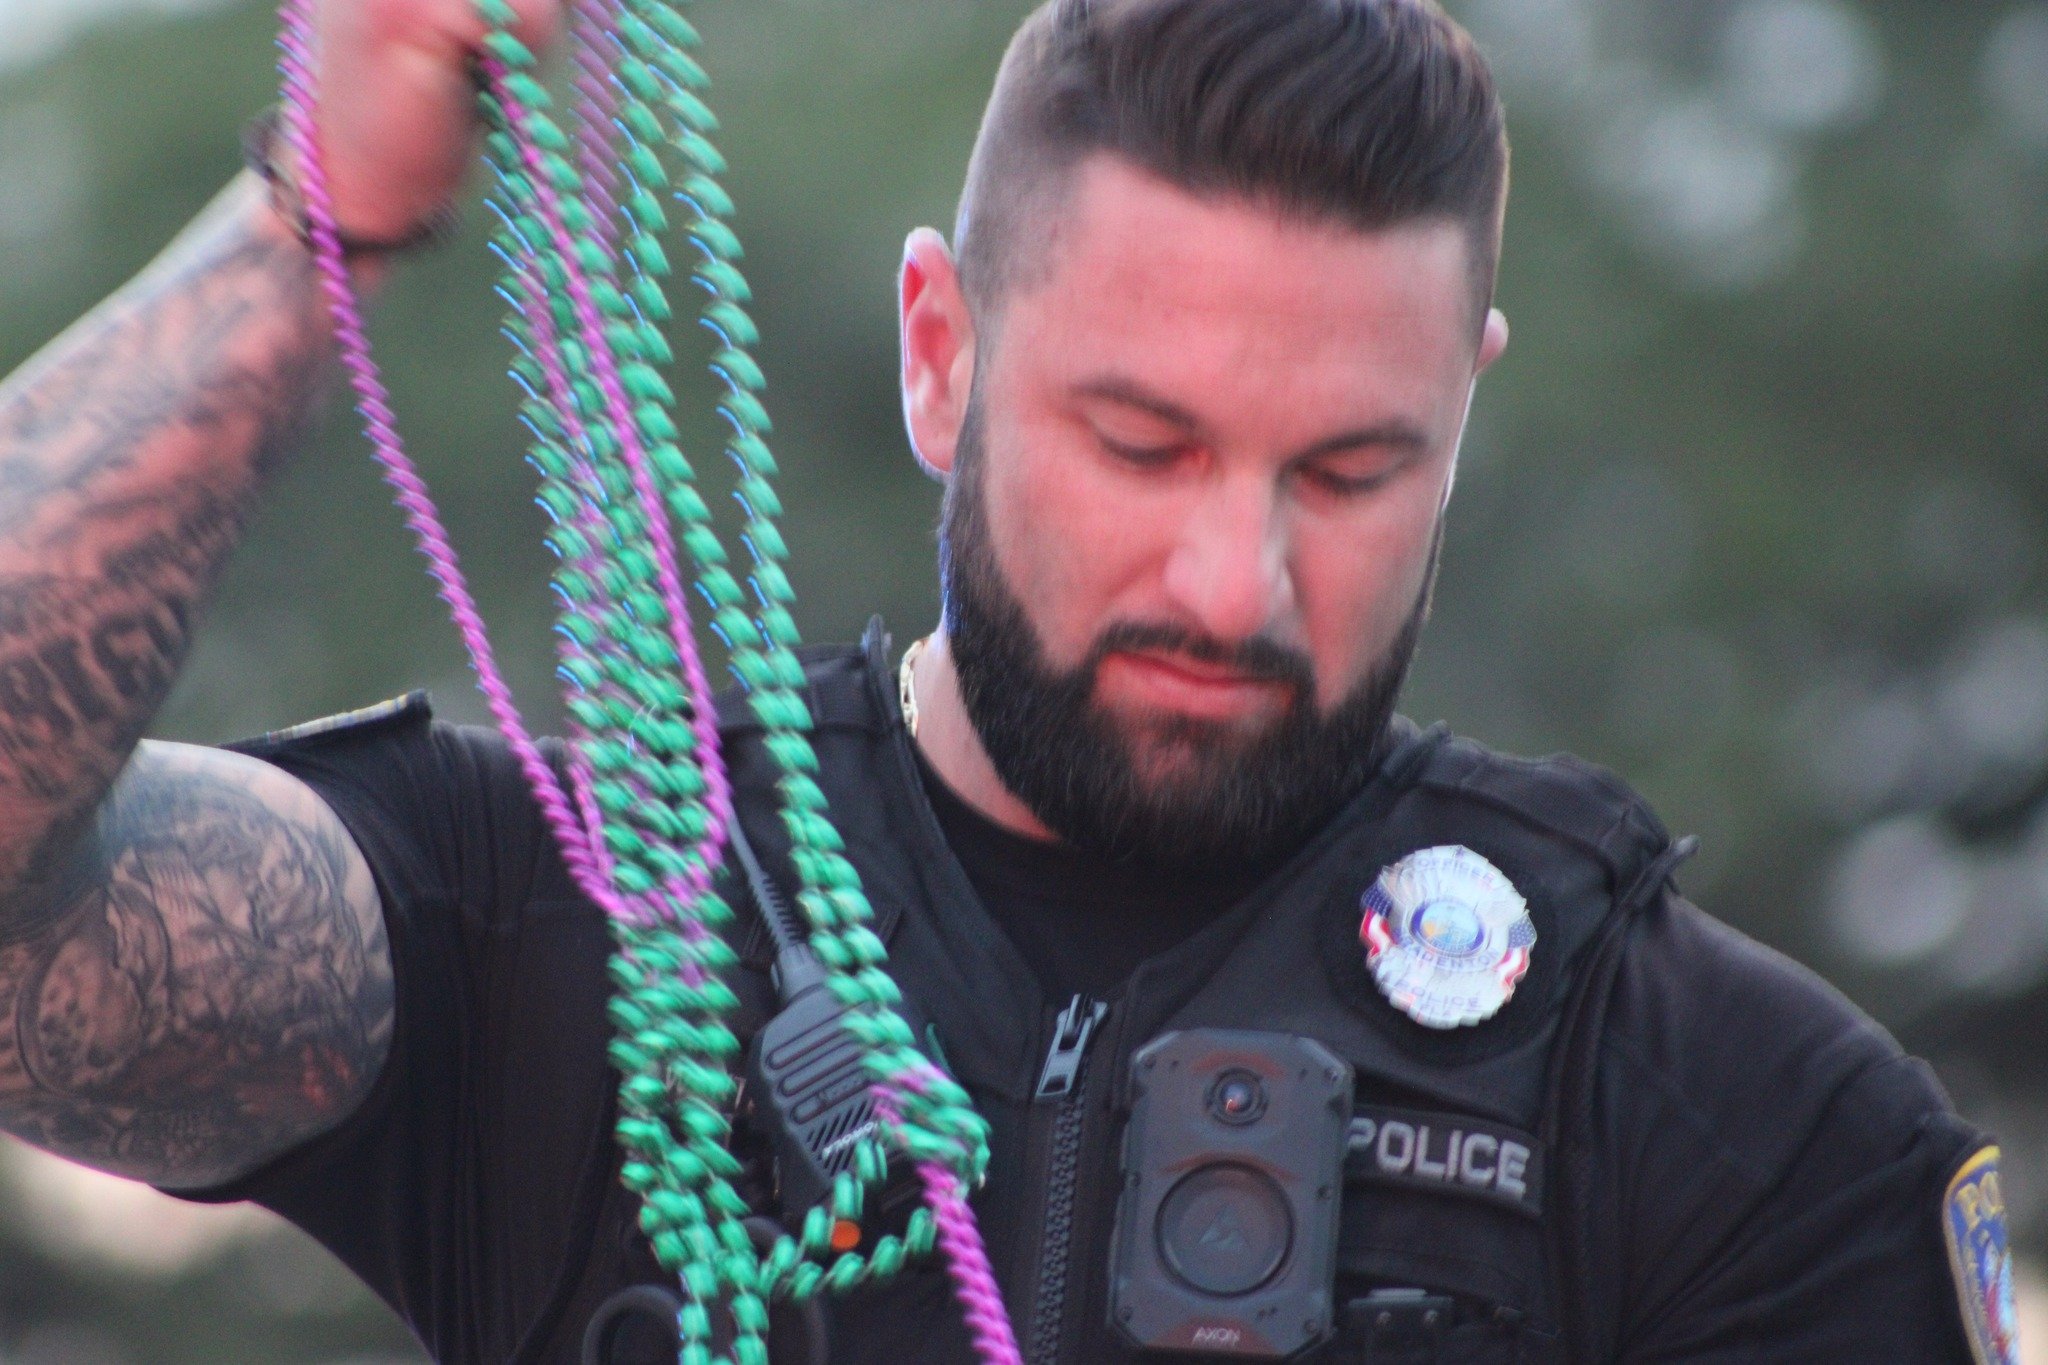 Have a bunch of beads from the De Soto Grand Parade but are befuddled about what to do with them? Bring them back to BPD instead of bagging them up as trash! We'll repurpose them for community outreach events! Don't worry, we'll take care of untangli